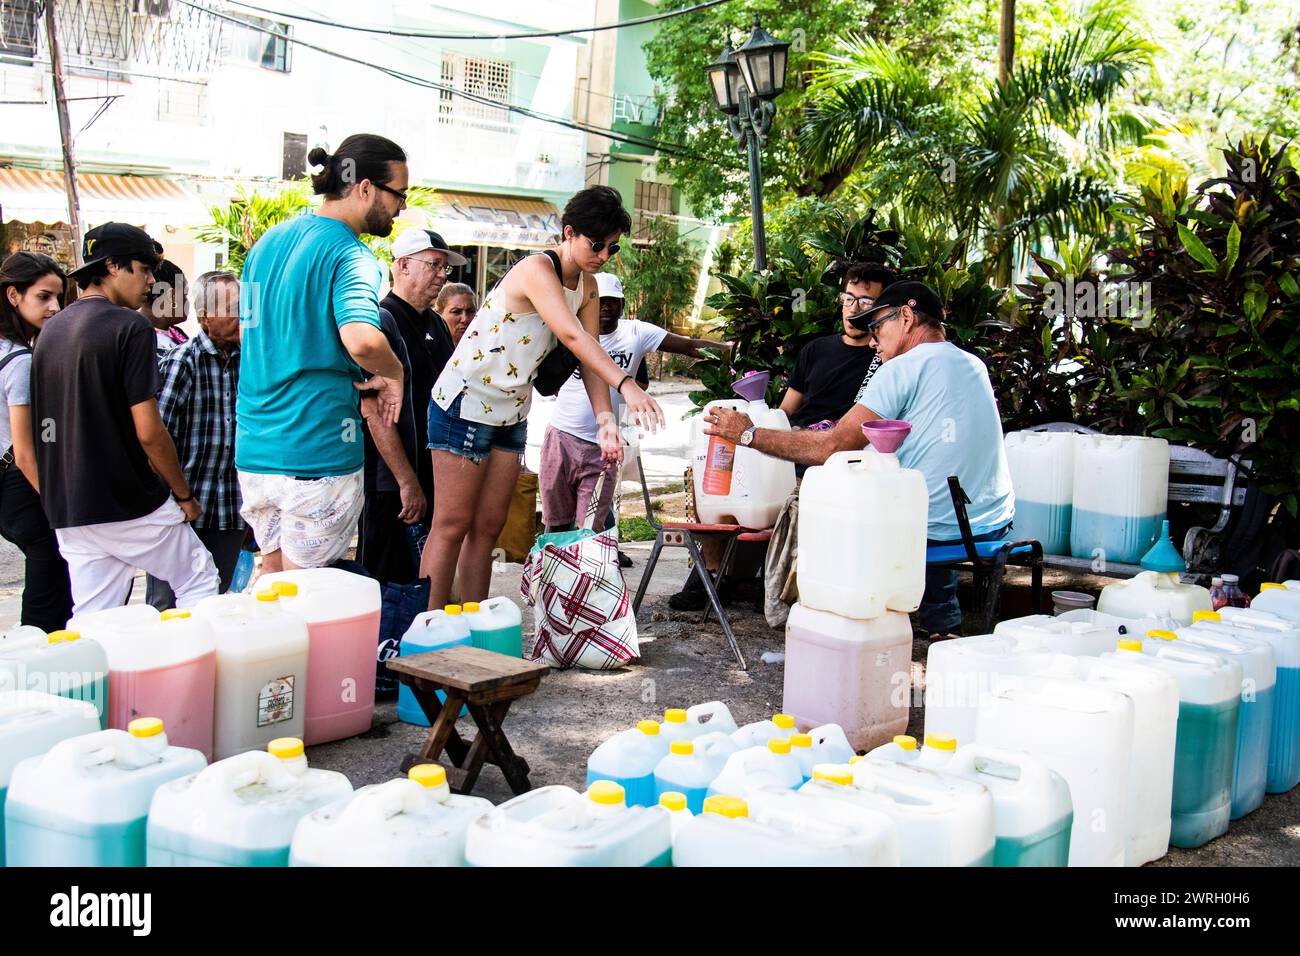 People getting government sponsored free laundry detergent at a park in Havana, Cuba. Stock Photo